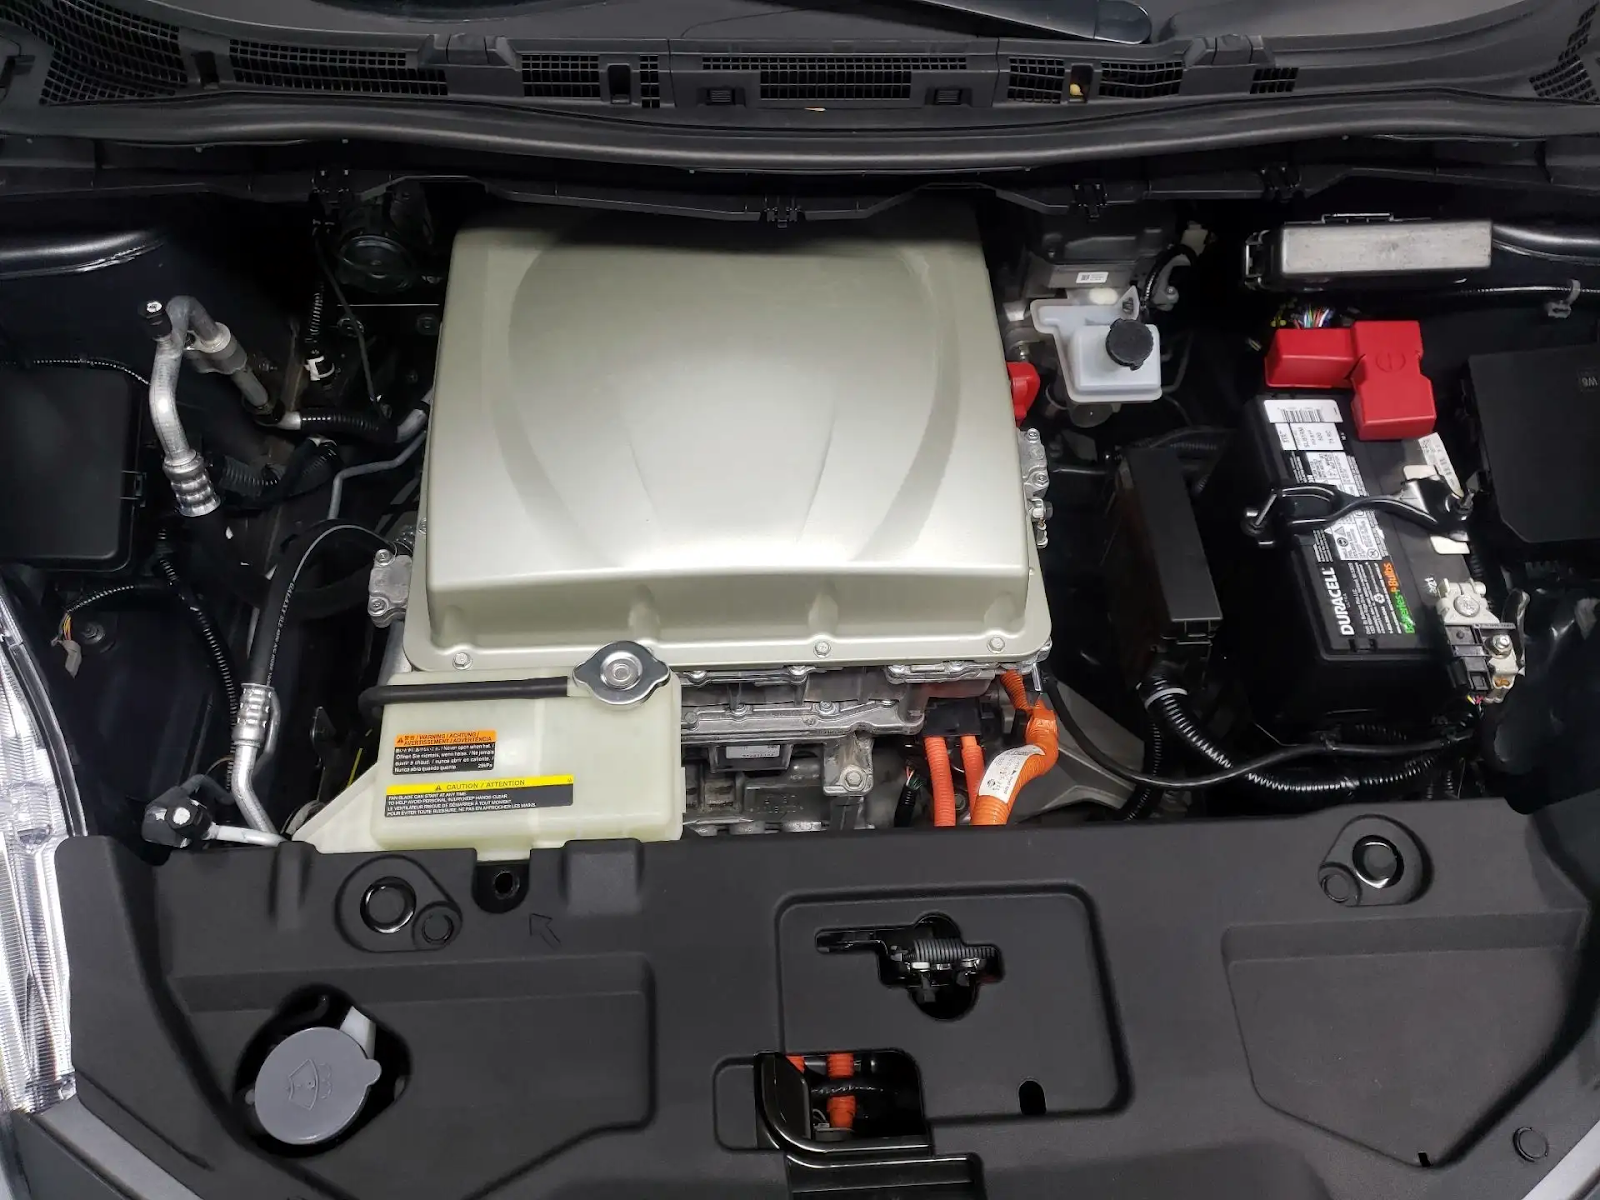 Nissan Leaf Battery with quick charge